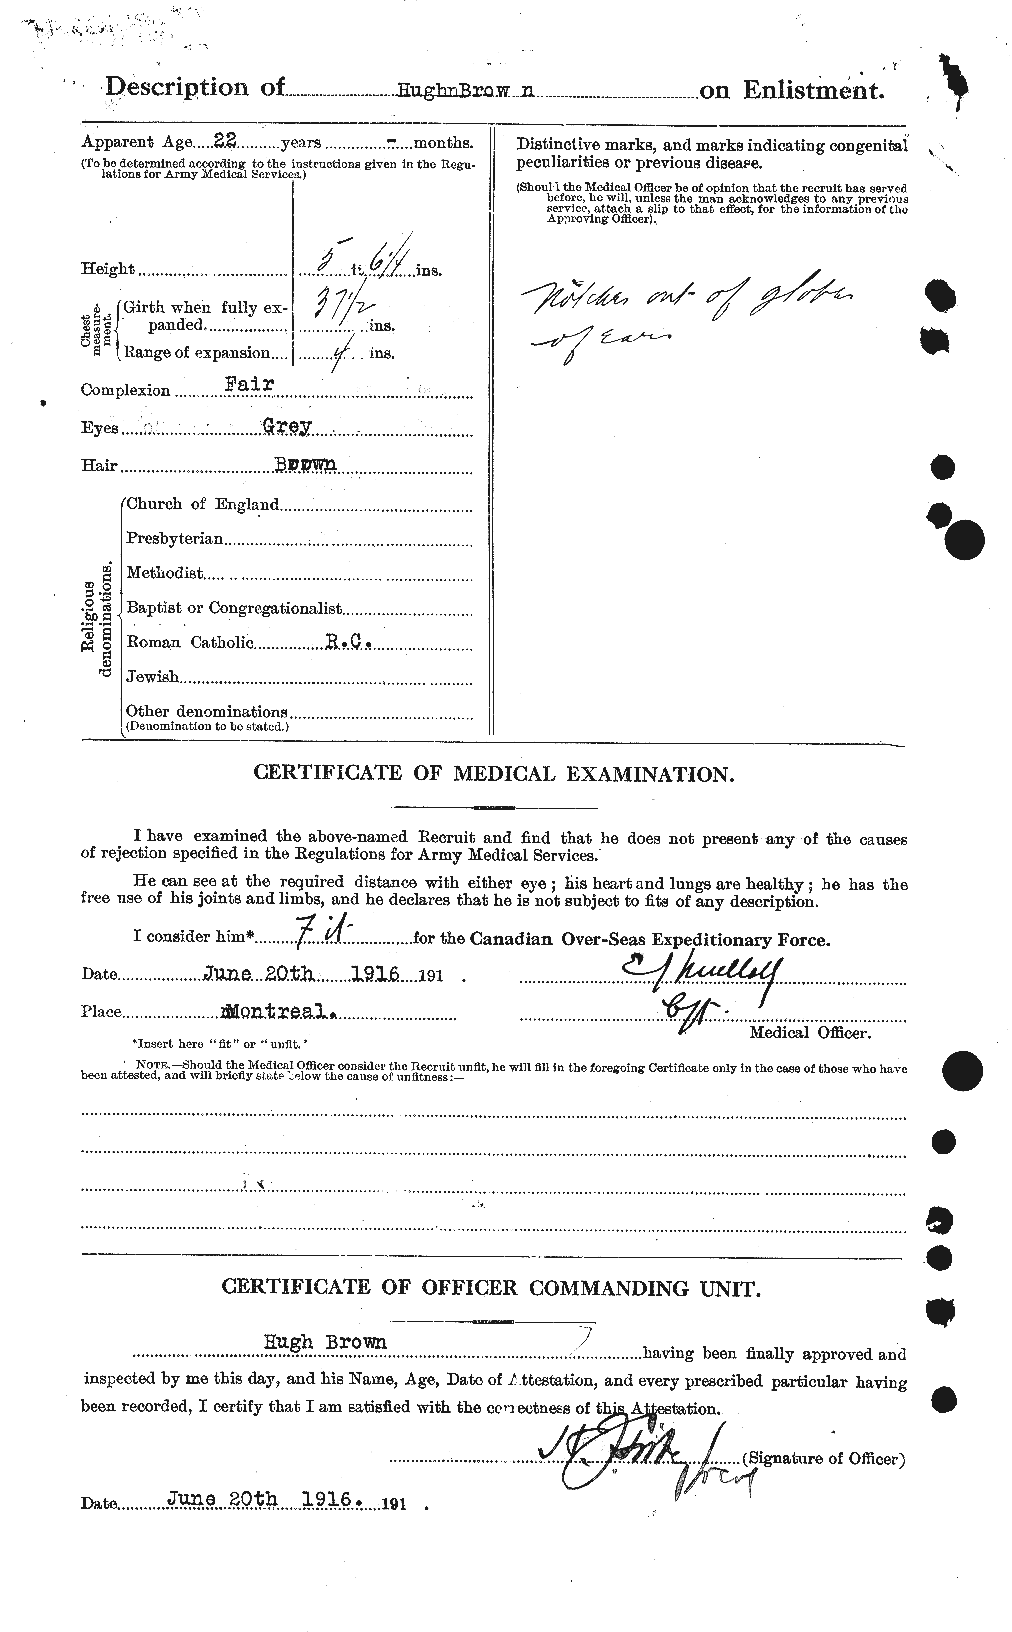 Personnel Records of the First World War - CEF 265637b